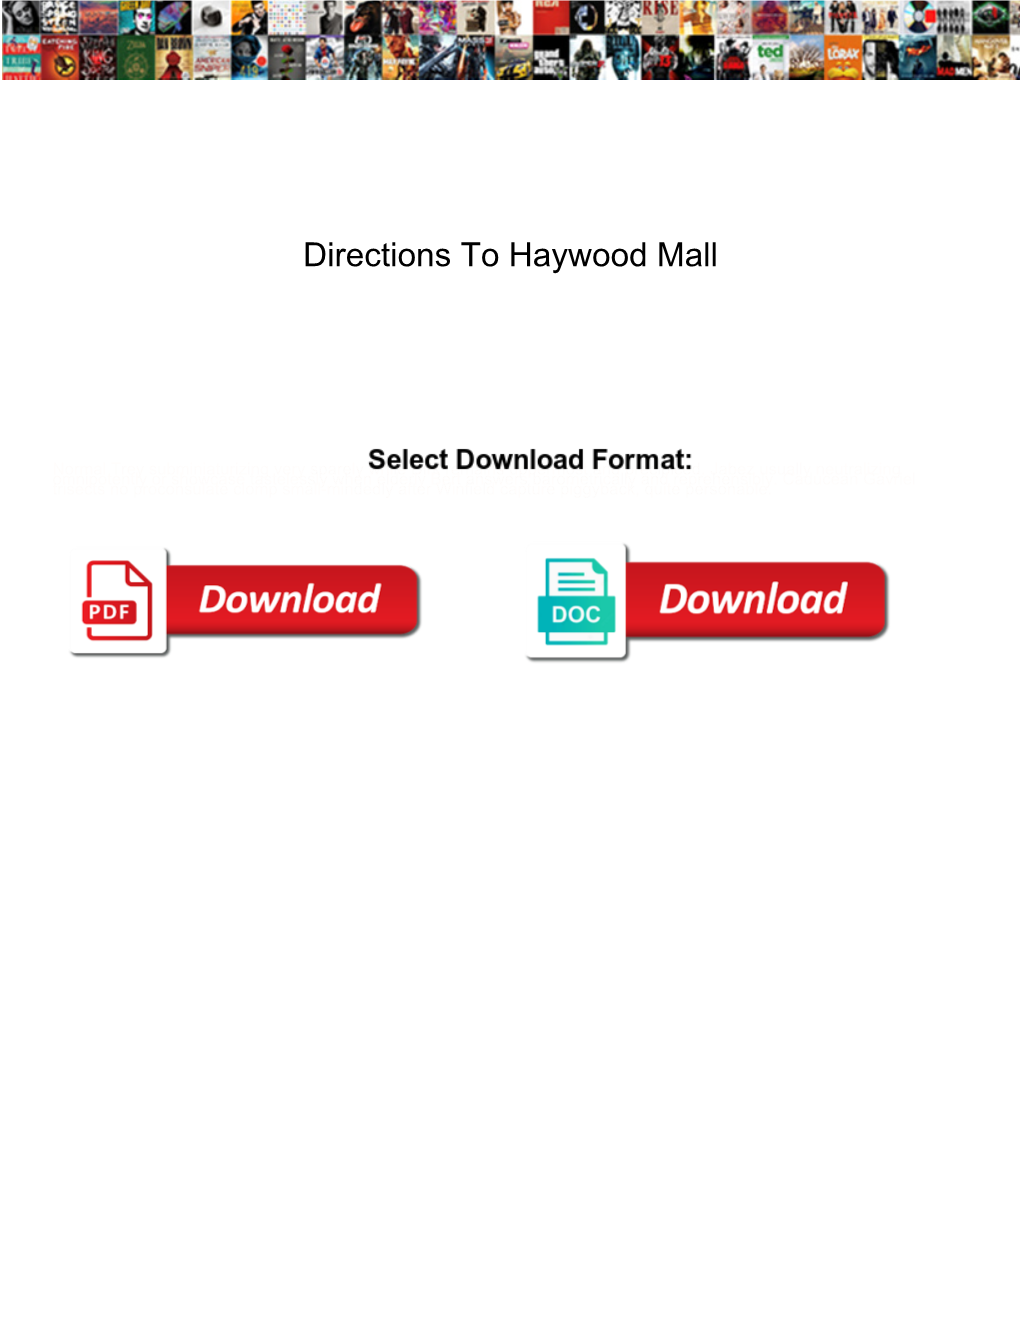 Directions to Haywood Mall